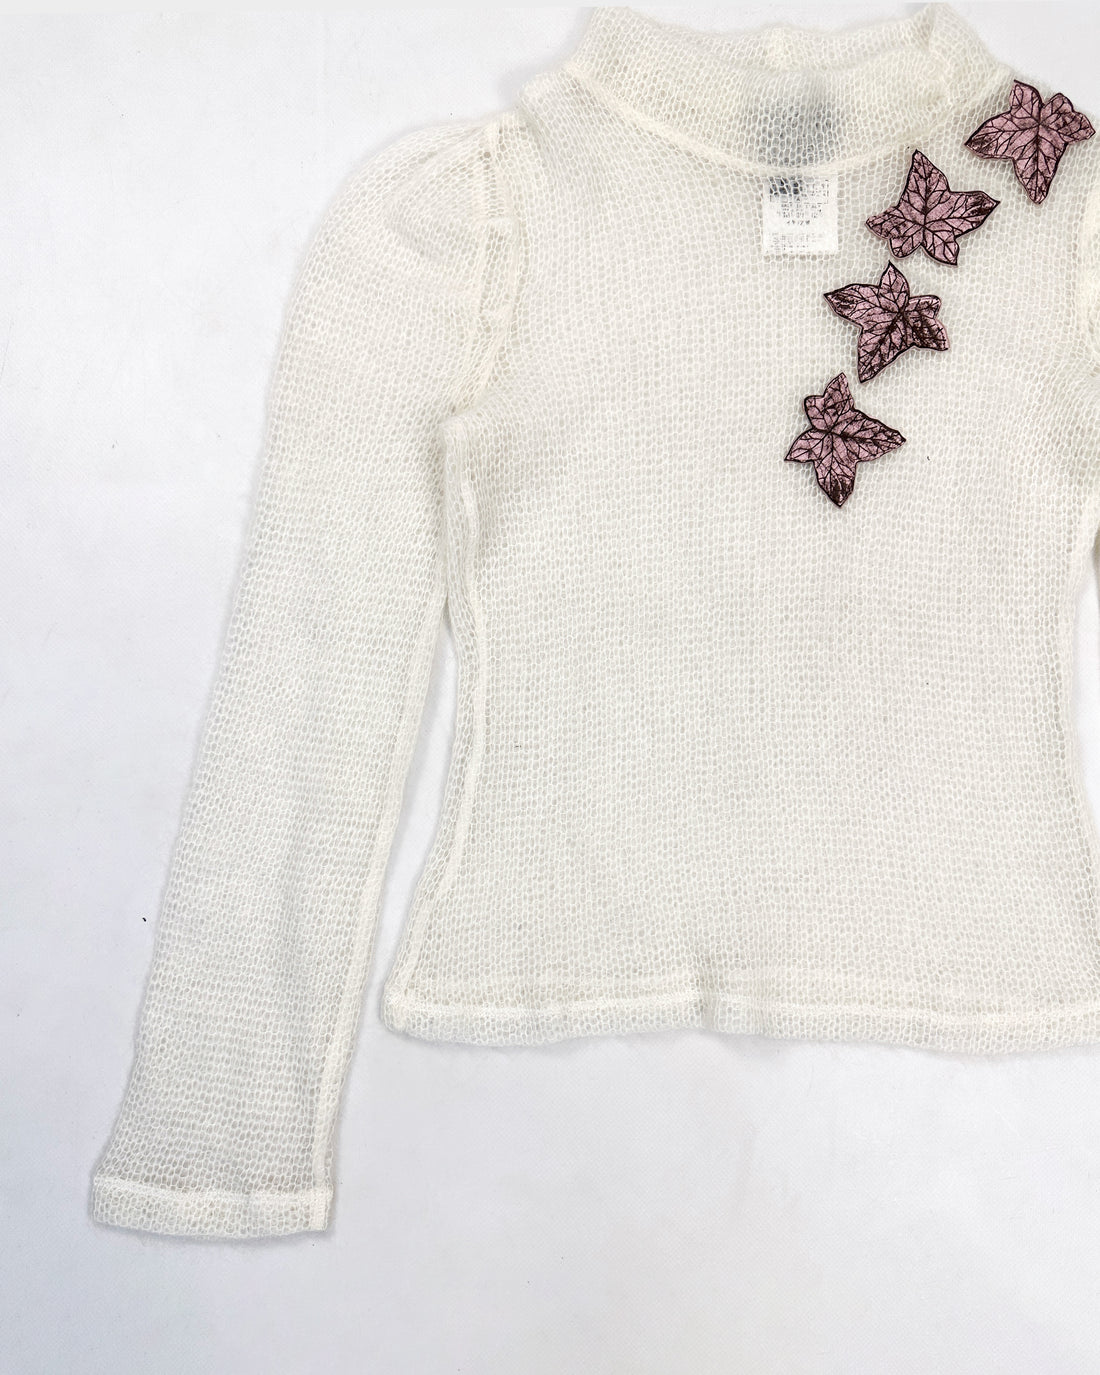 Armani Mohair Decorated White Mesh Top 2000's